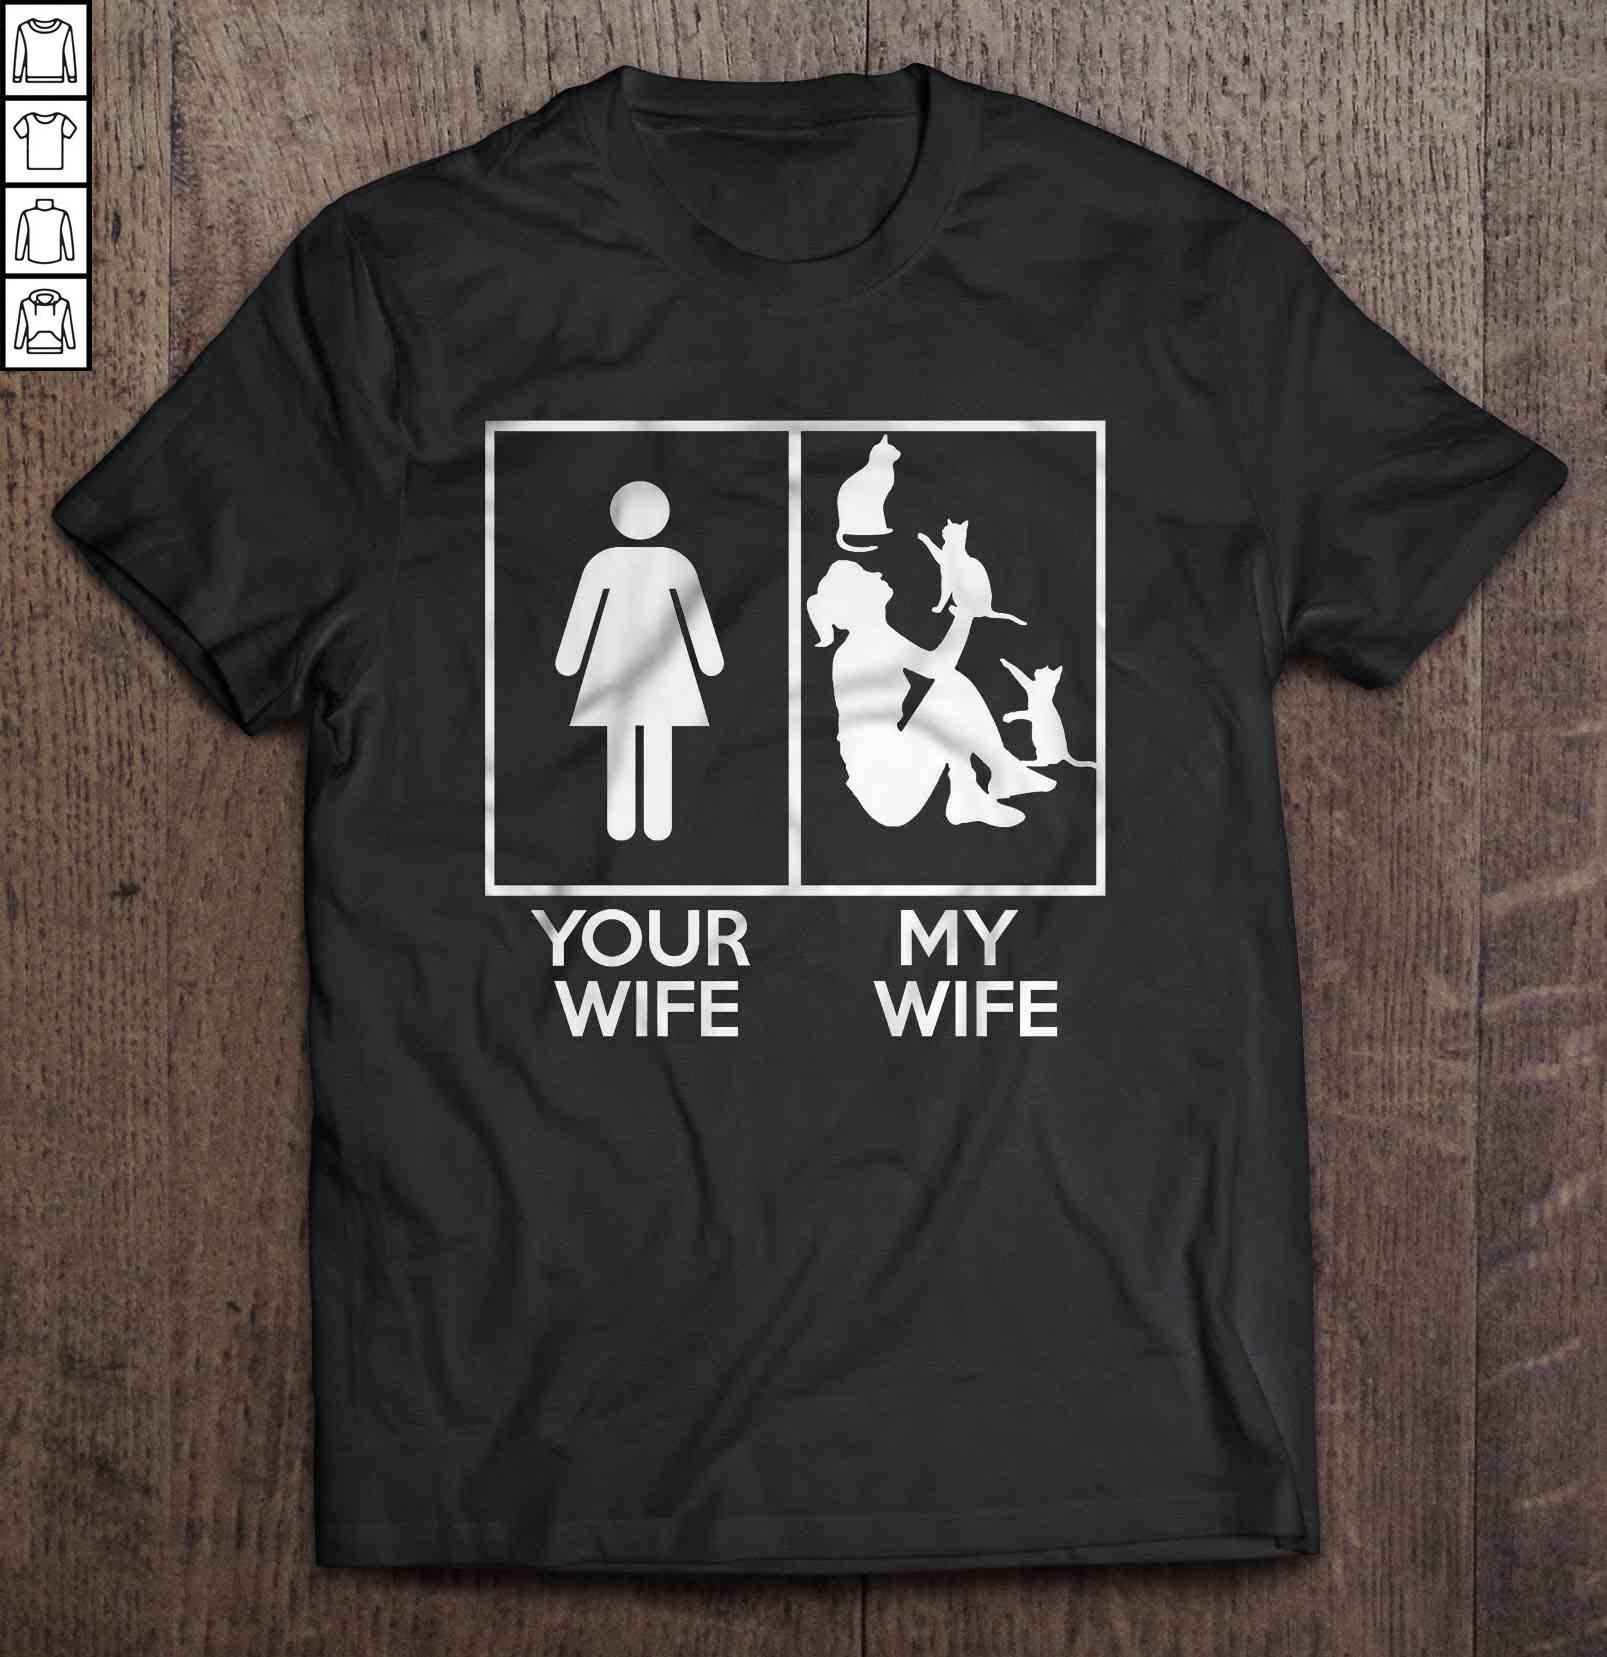 Your Wife My Wife – My Cat Wife 2 TShirt